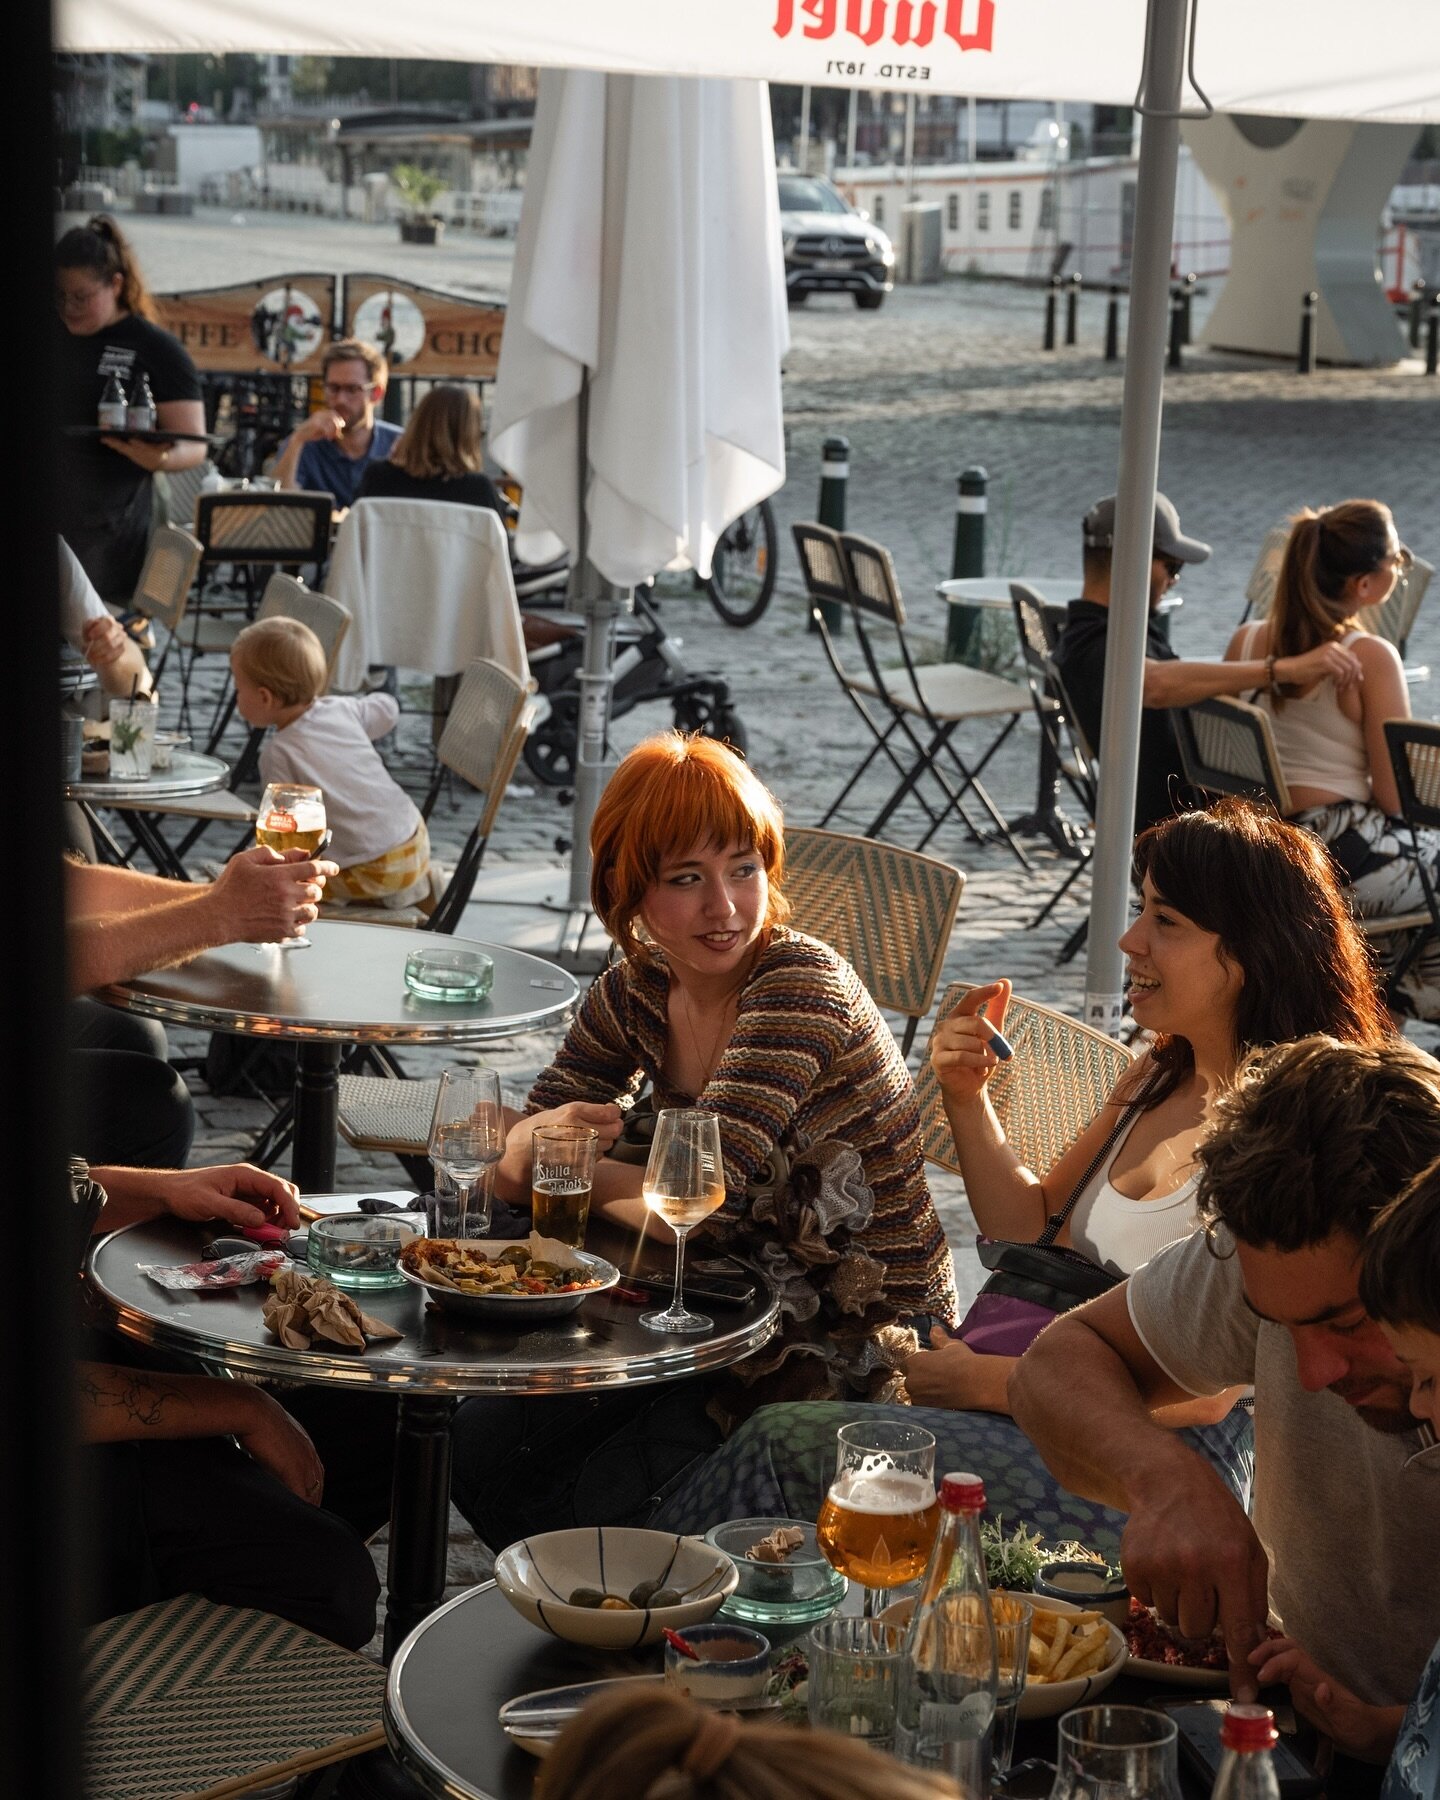 Sun will be back this weekend ☀️ Come enjoy delicious food &amp; drinks on our terrace! 

📍 Grand Canal - Quai des p&eacute;niches 44B - 1000 Bruxelles

#GrandCanalBxl #GrandCanalBrussels #CoffeeBrussels #CoffeeTime #afternoonbreak